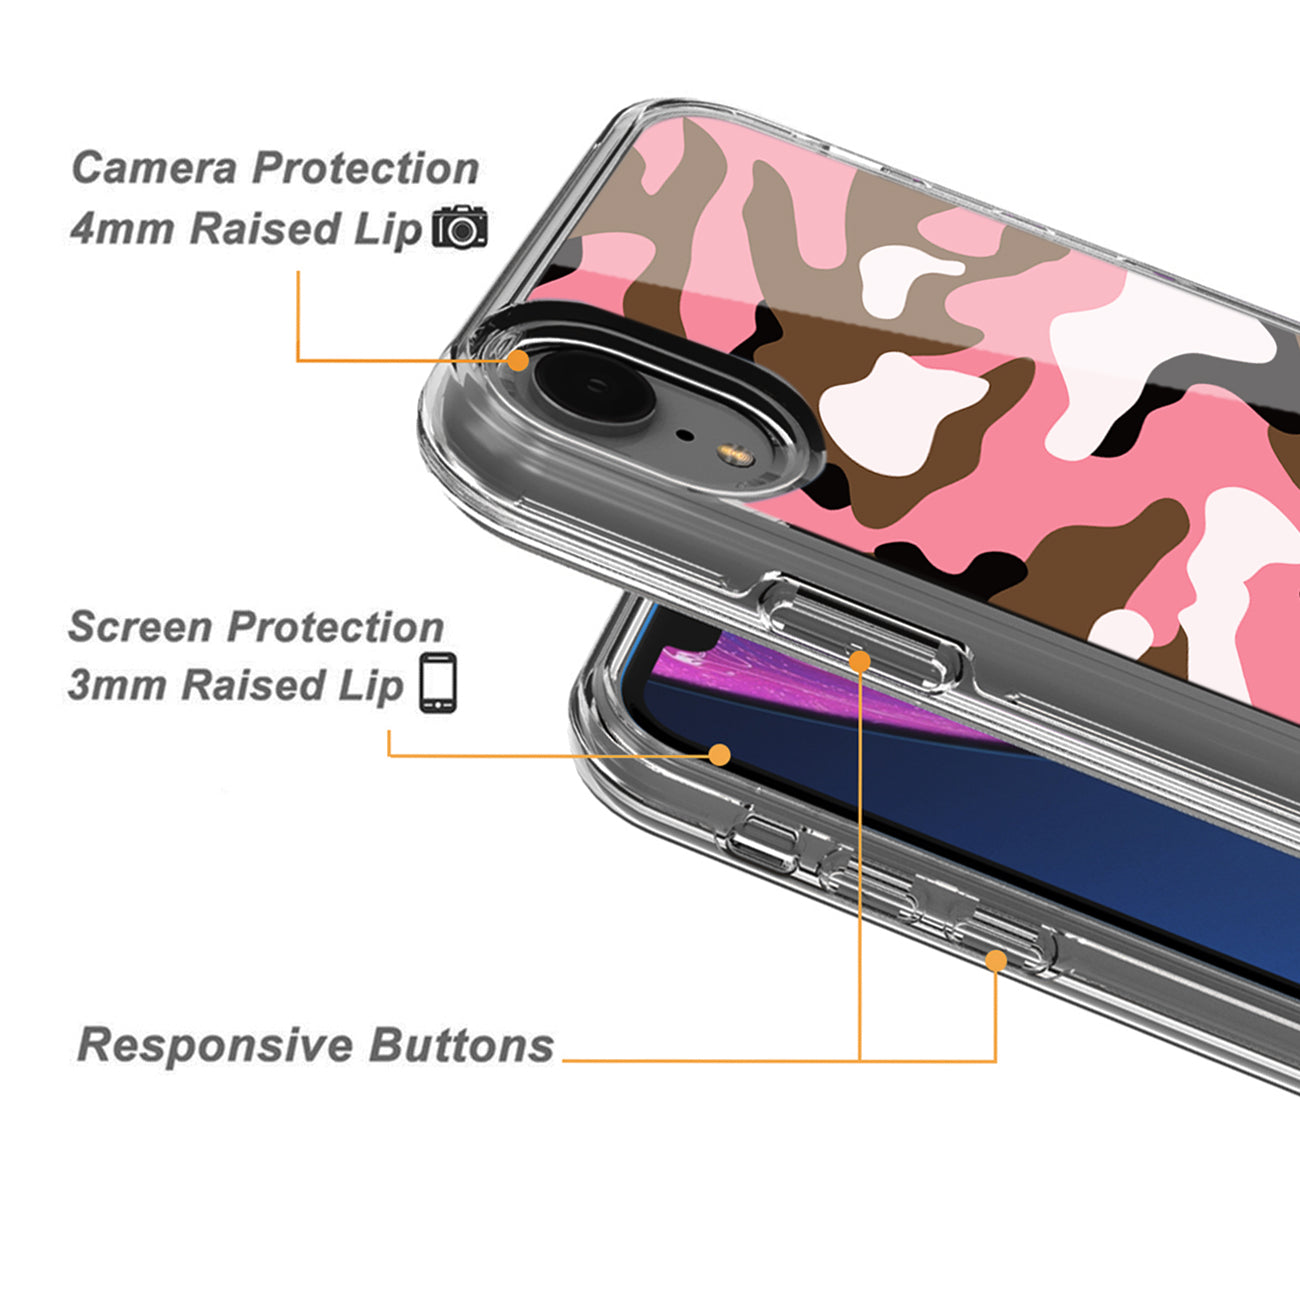 Camouflage Dual Layer Hybrid Hard Plastic and Soft TPU Rubber Case Cover for APPLE IPHONE XR In Pink